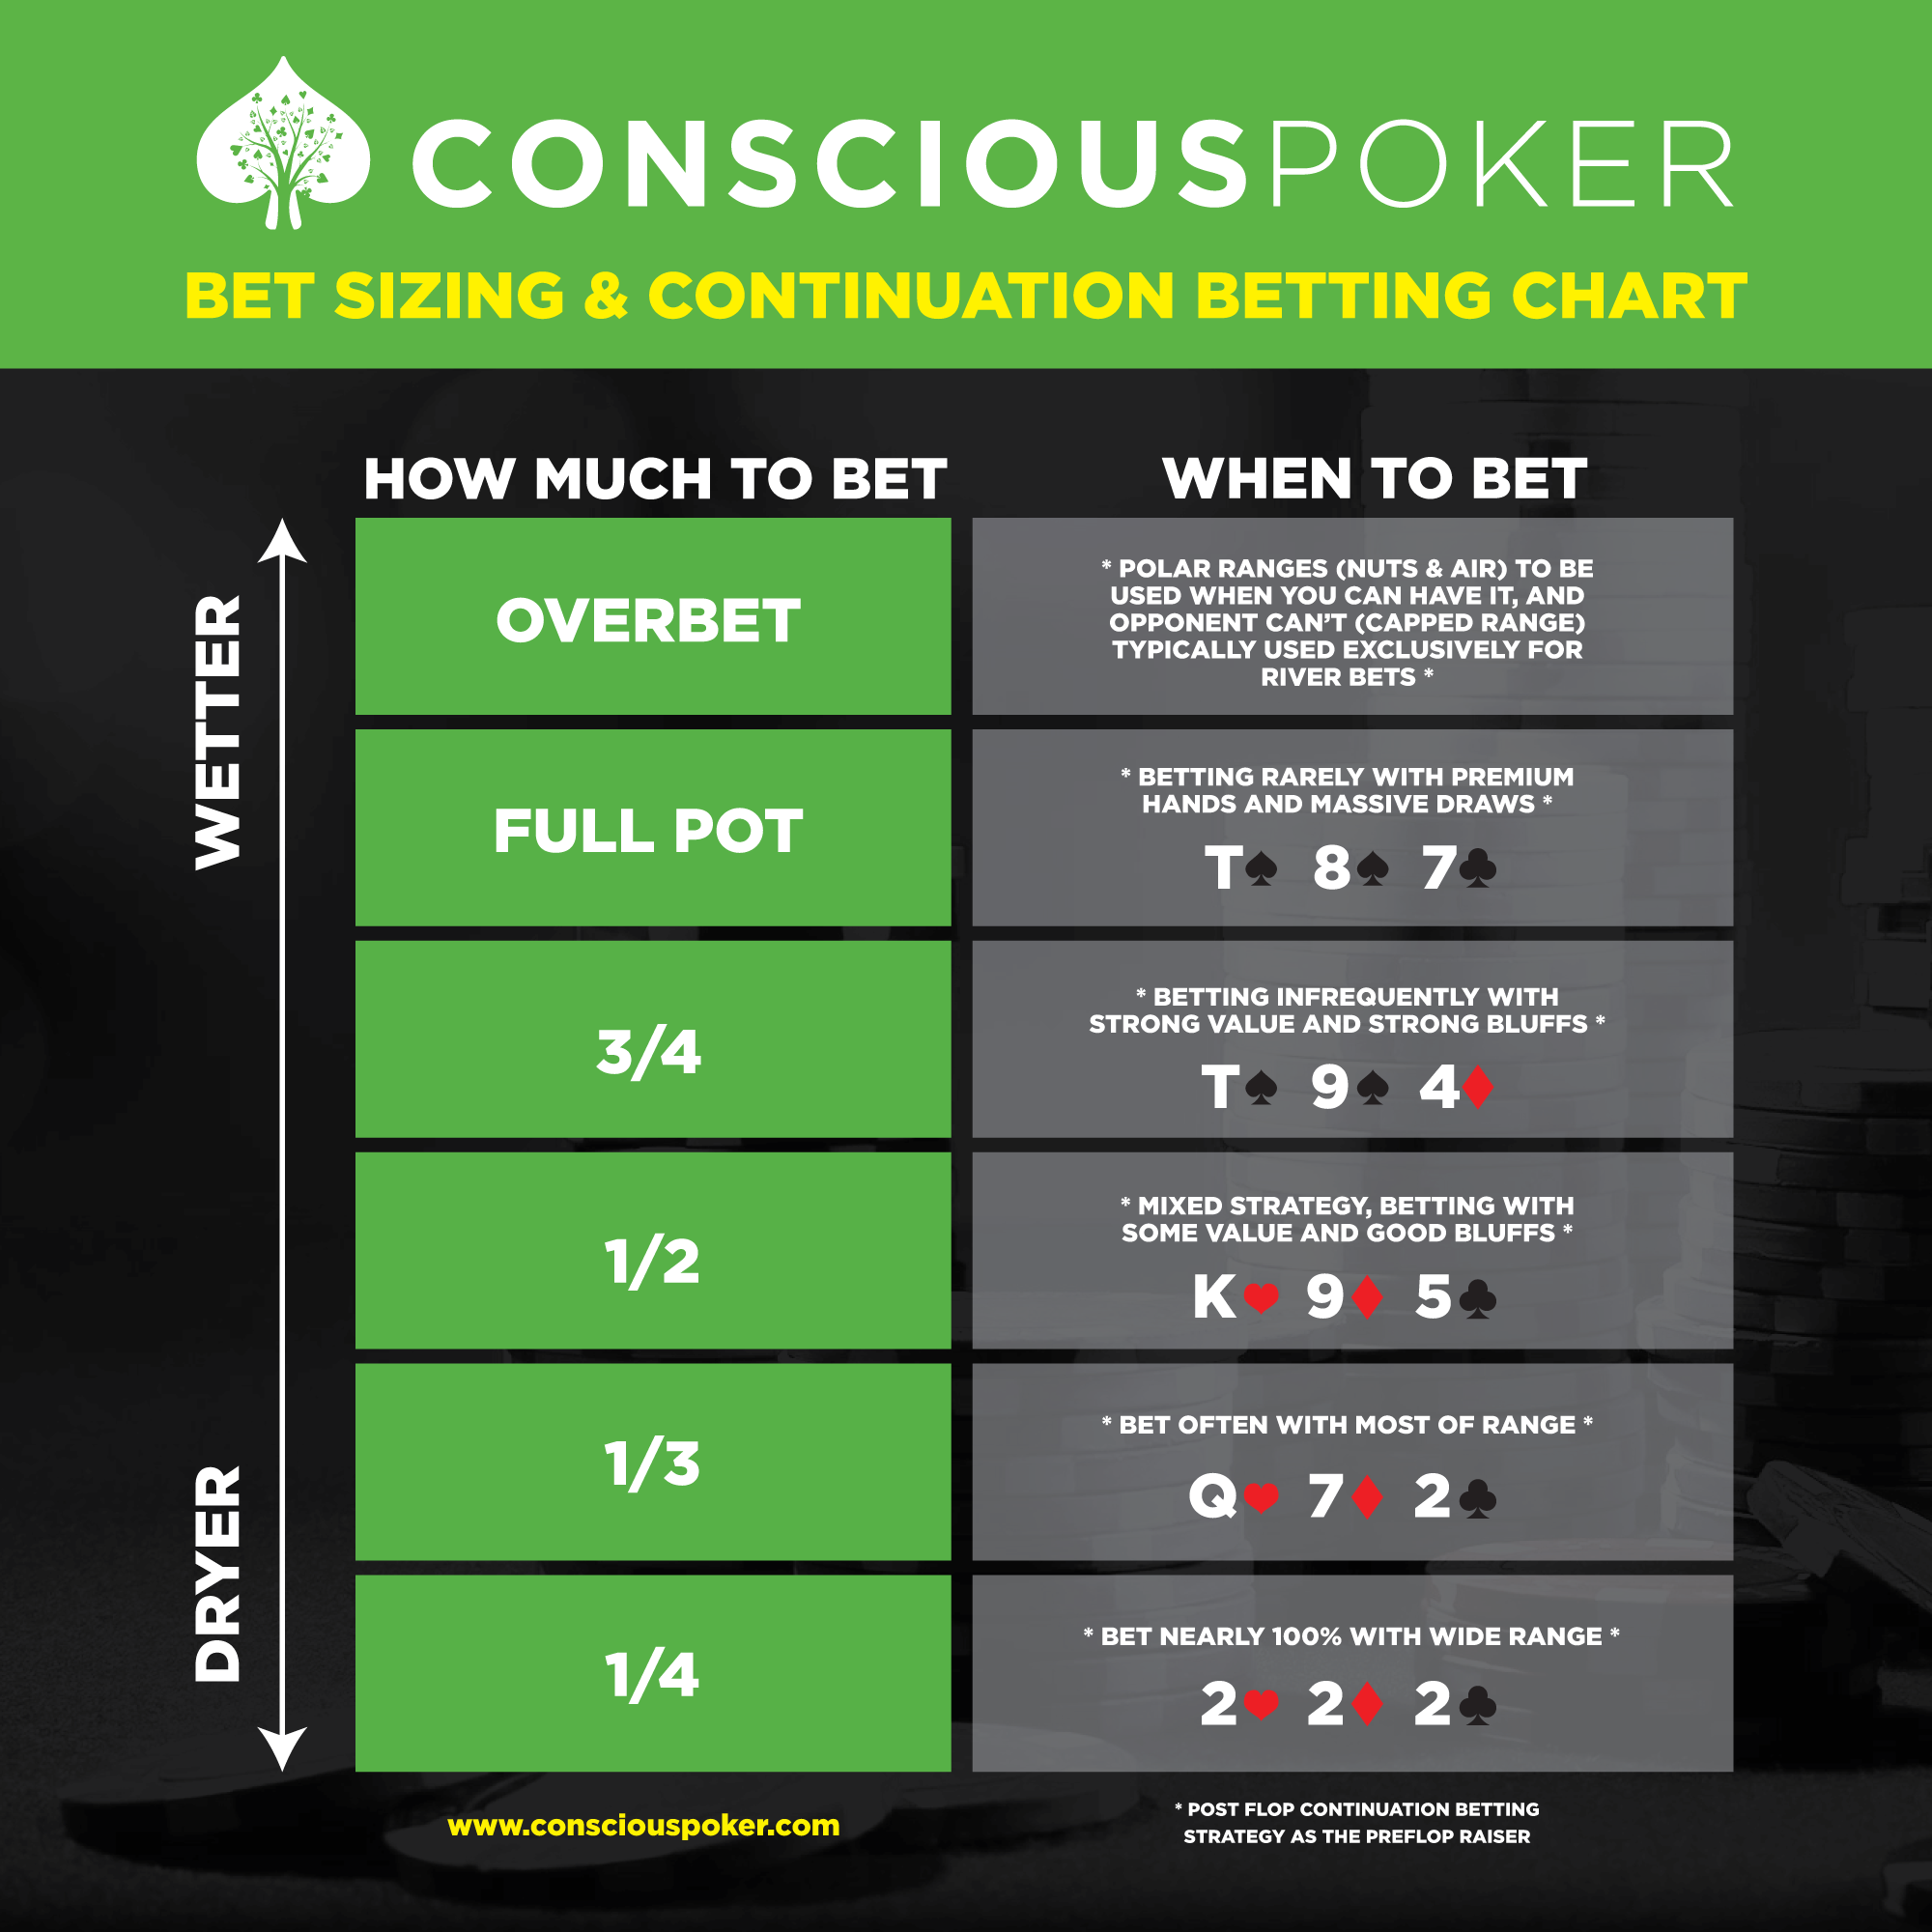 What’s The Importance Of Varying Bet Sizes?